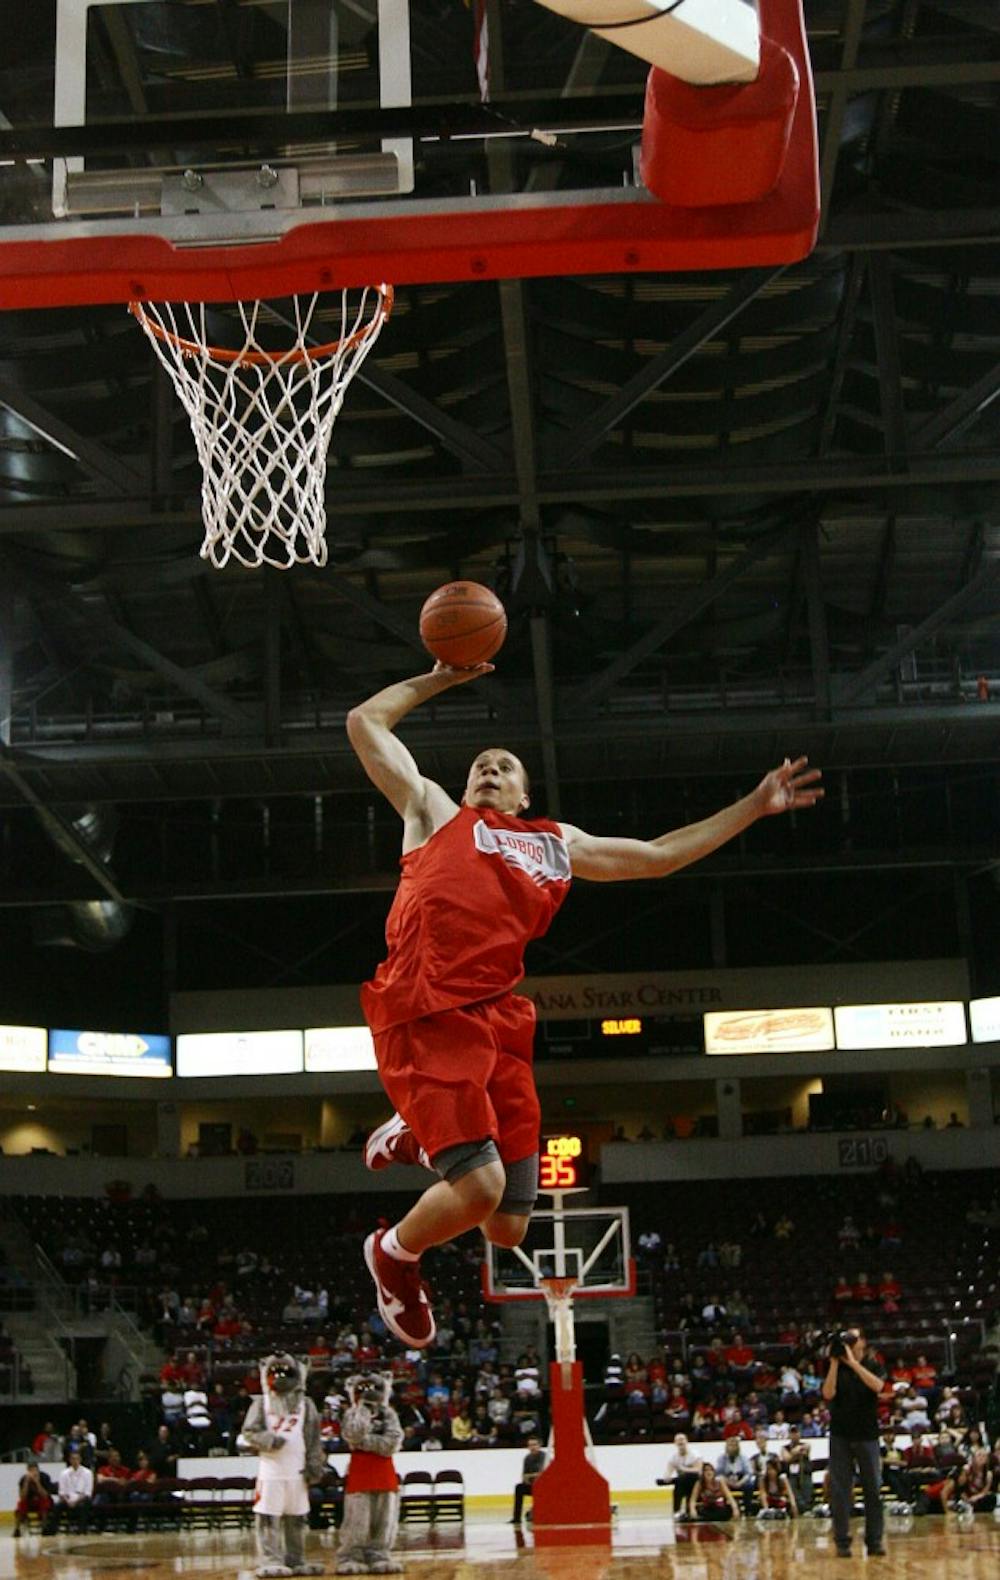 	Swing man Phillip McDonald soars through the air on the way to a one-handed dunk during UNM’s annual Lobo Howl. McDonald won the 3-point contest.